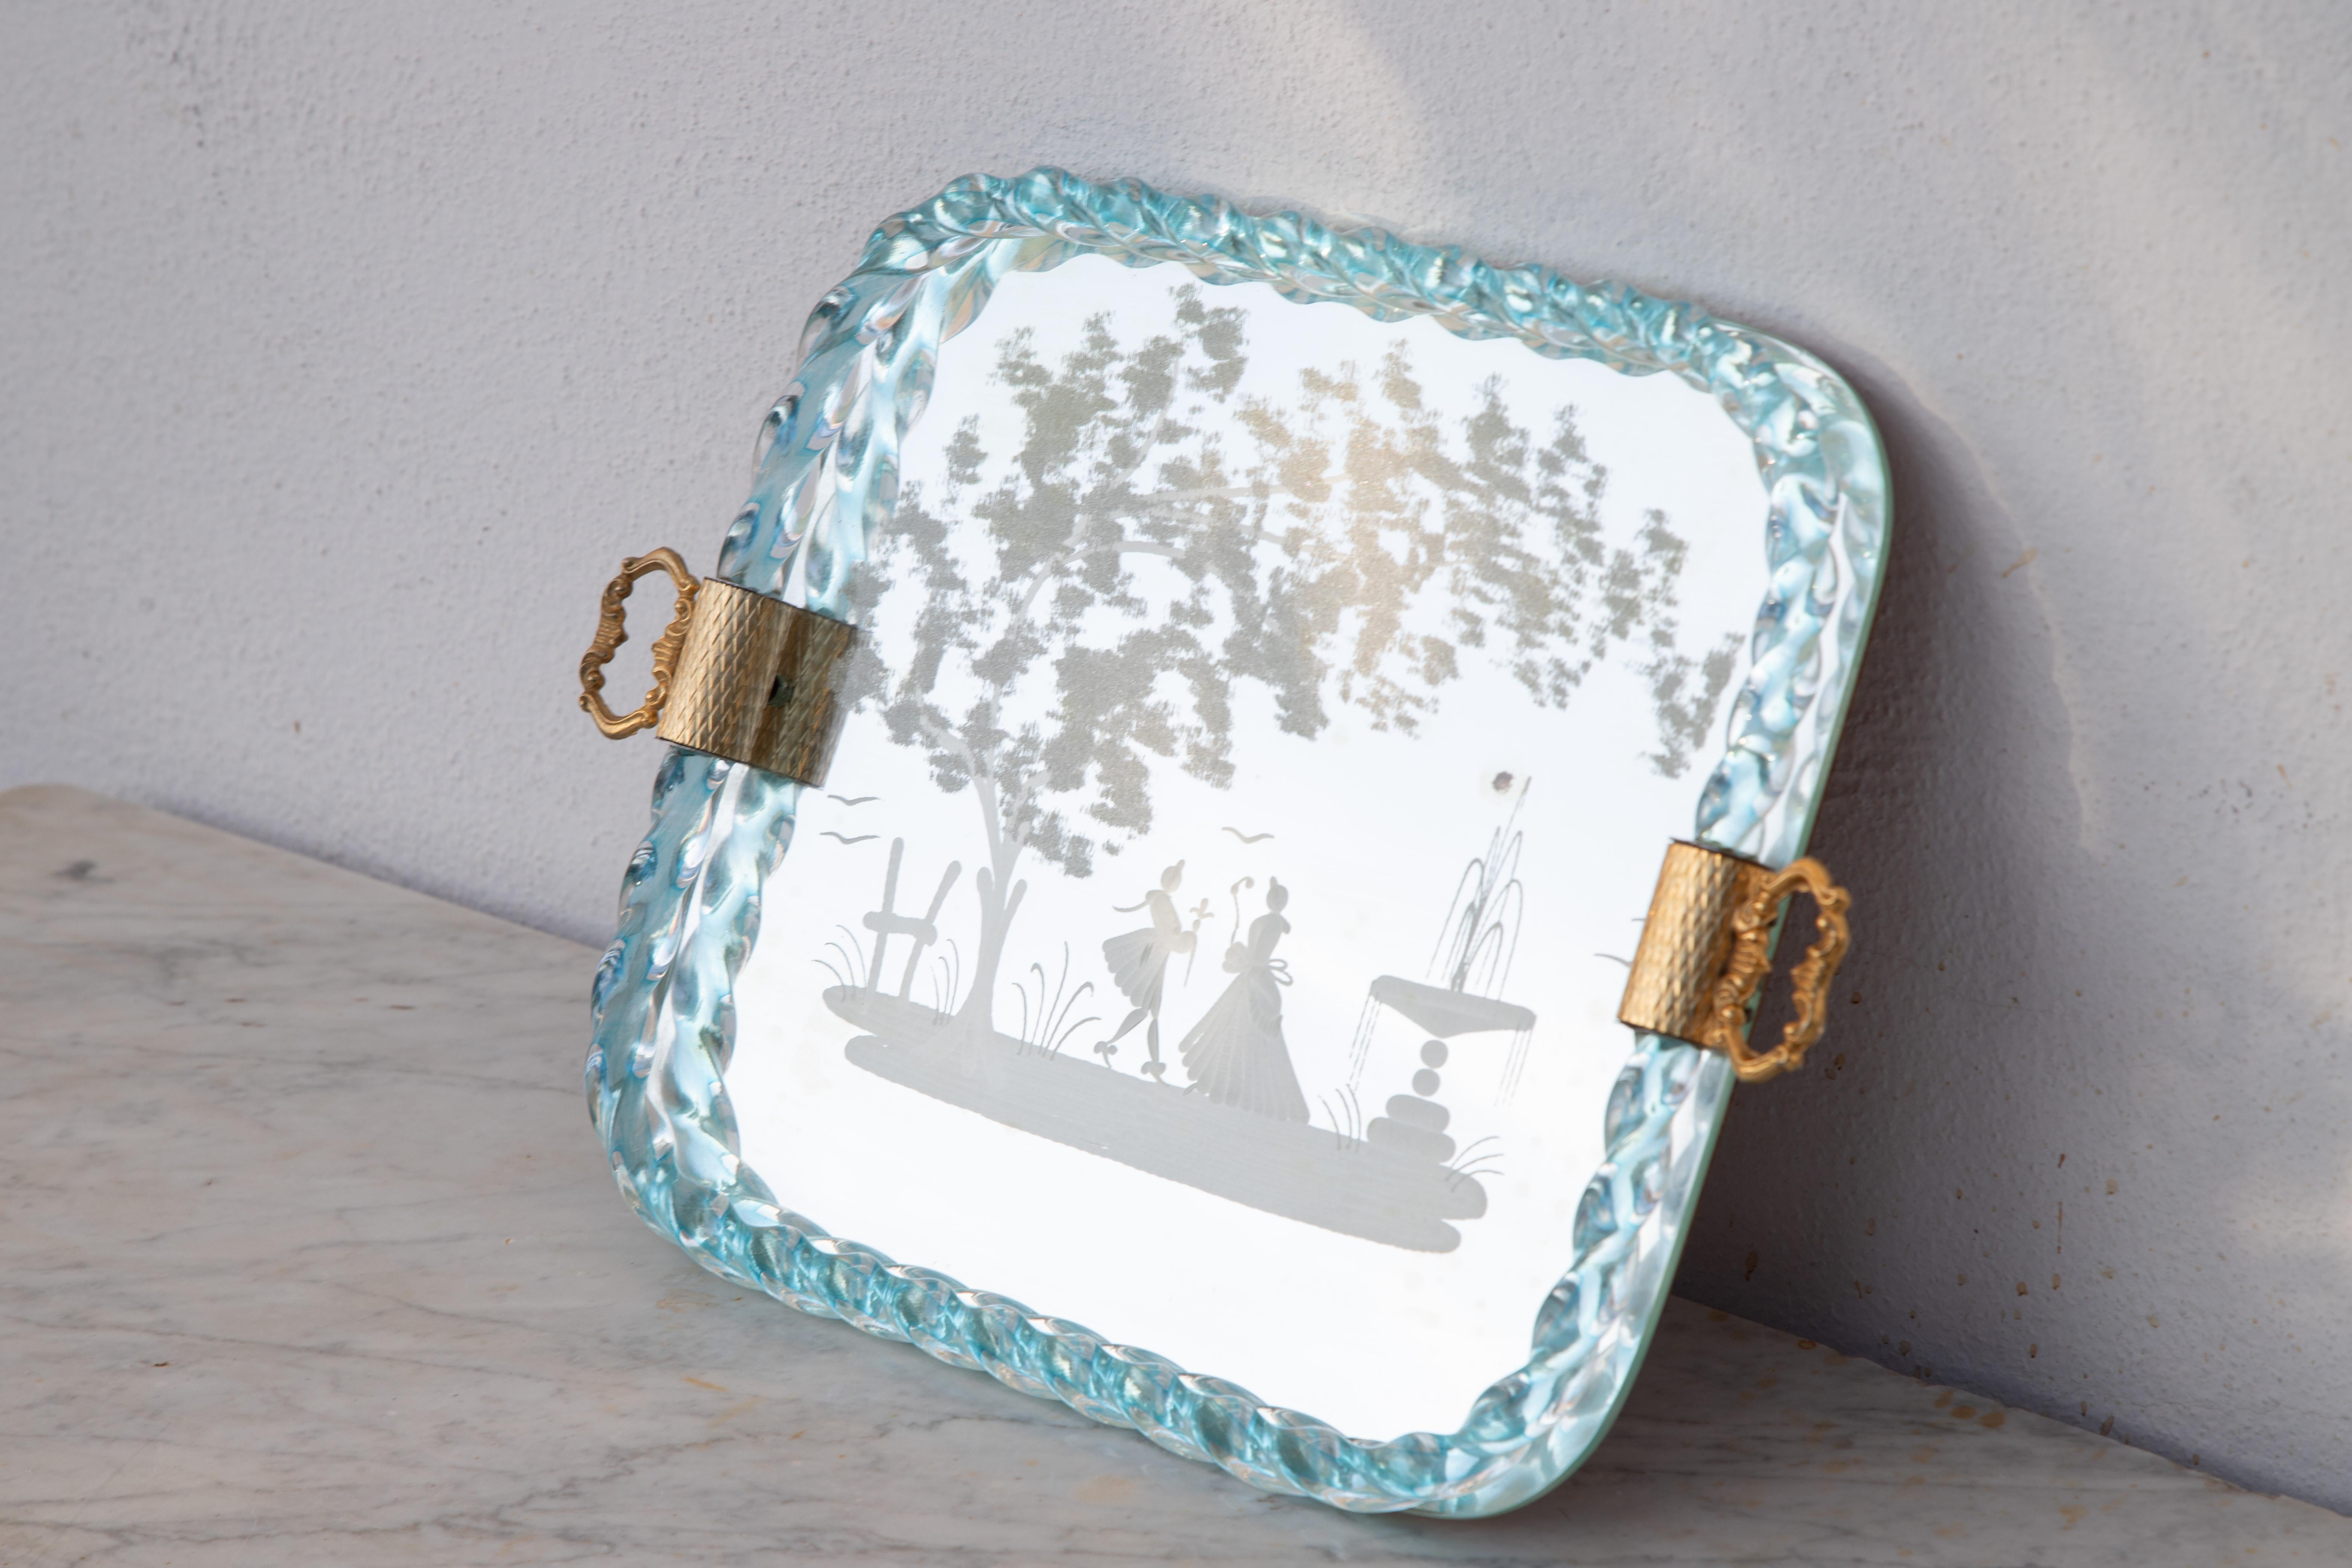 Rectangular Murano glass tray from the 1950s. Noble Venetian mirror glass with etched golden tendril decoration, a turned glass edge and gilded handles. Stylish Italian craftsmanship from Venice.

